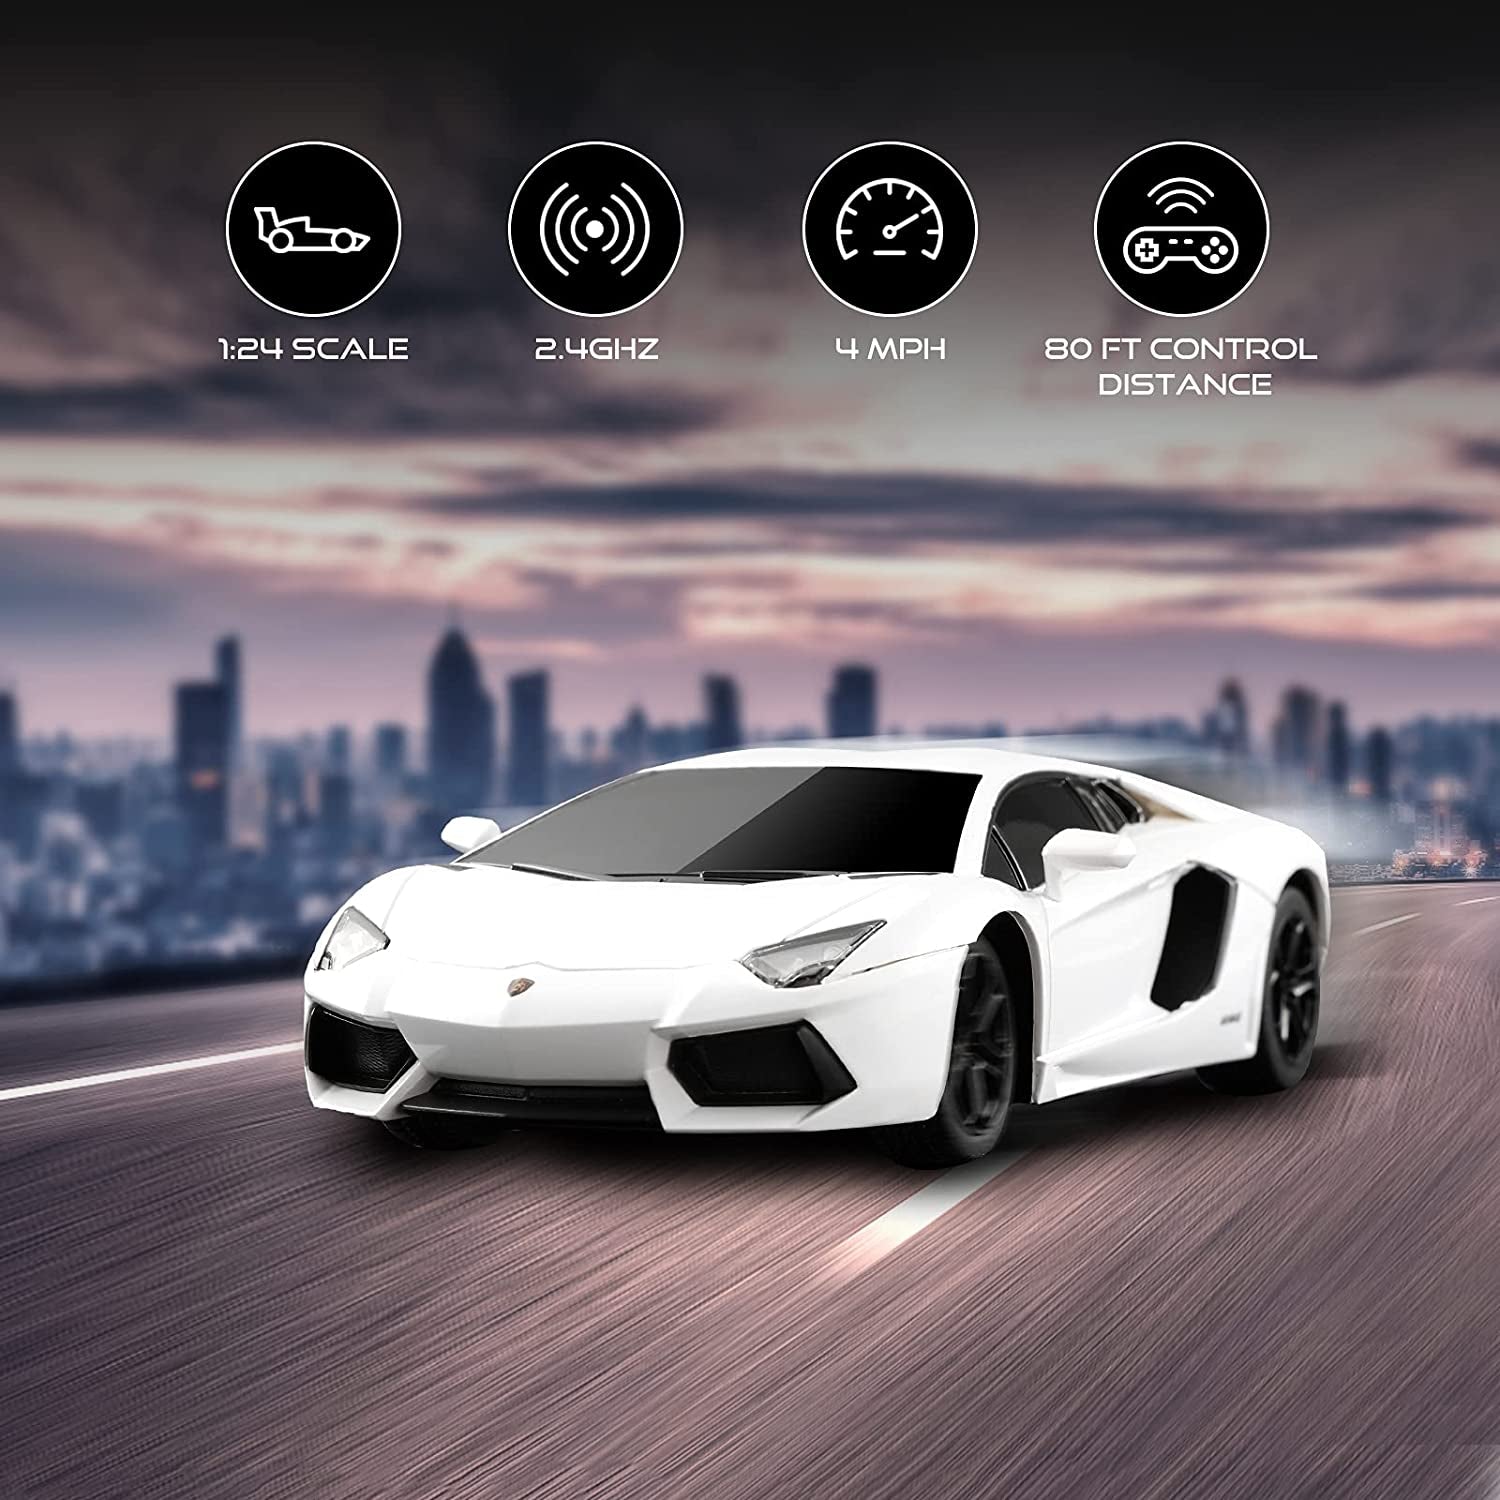 X Rastar Remote Control Car, 1:24 Scale Aventador Coupe Race Toy Car, RC Hobby Model Vehicle for Boys, Girls and Adults, White